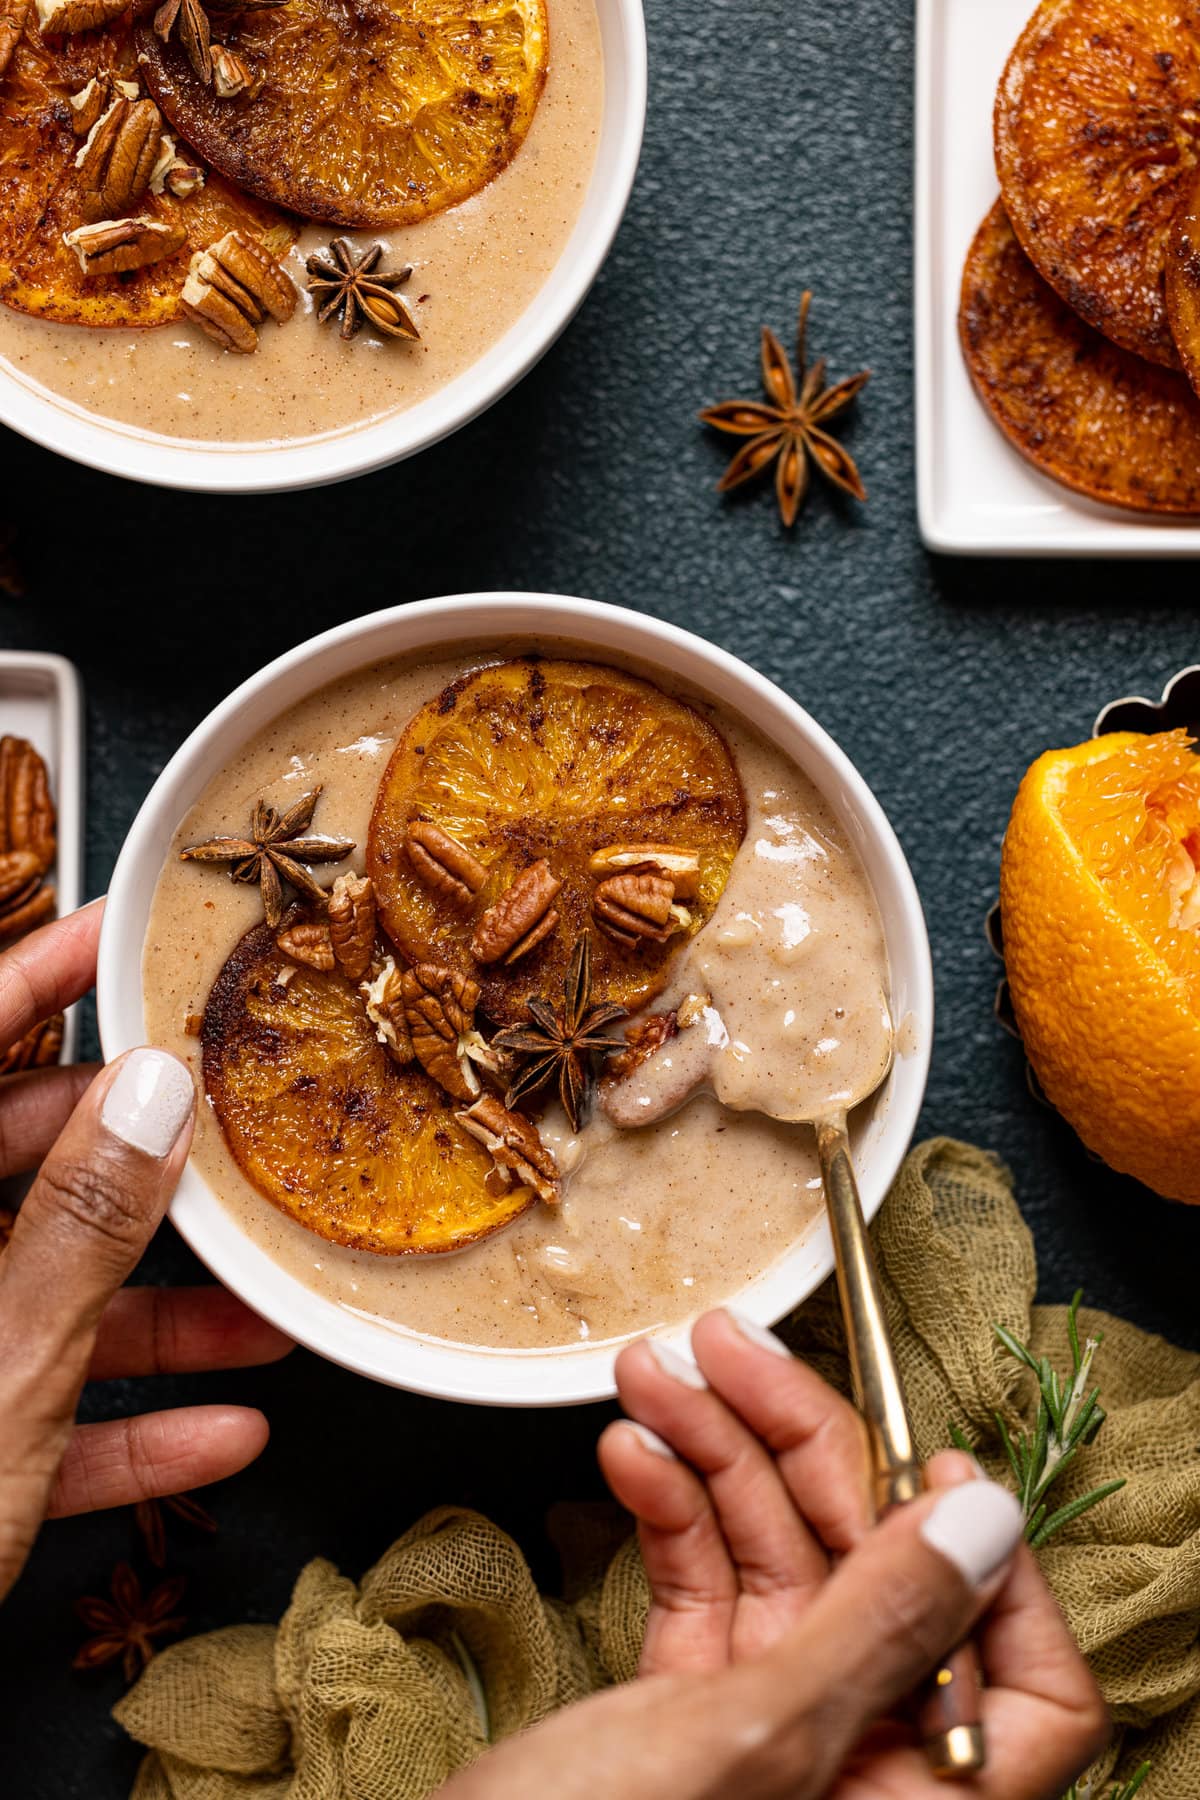 Hands holding a bowl of Maple Cinnamon Oatmeal with Roasted Oranges